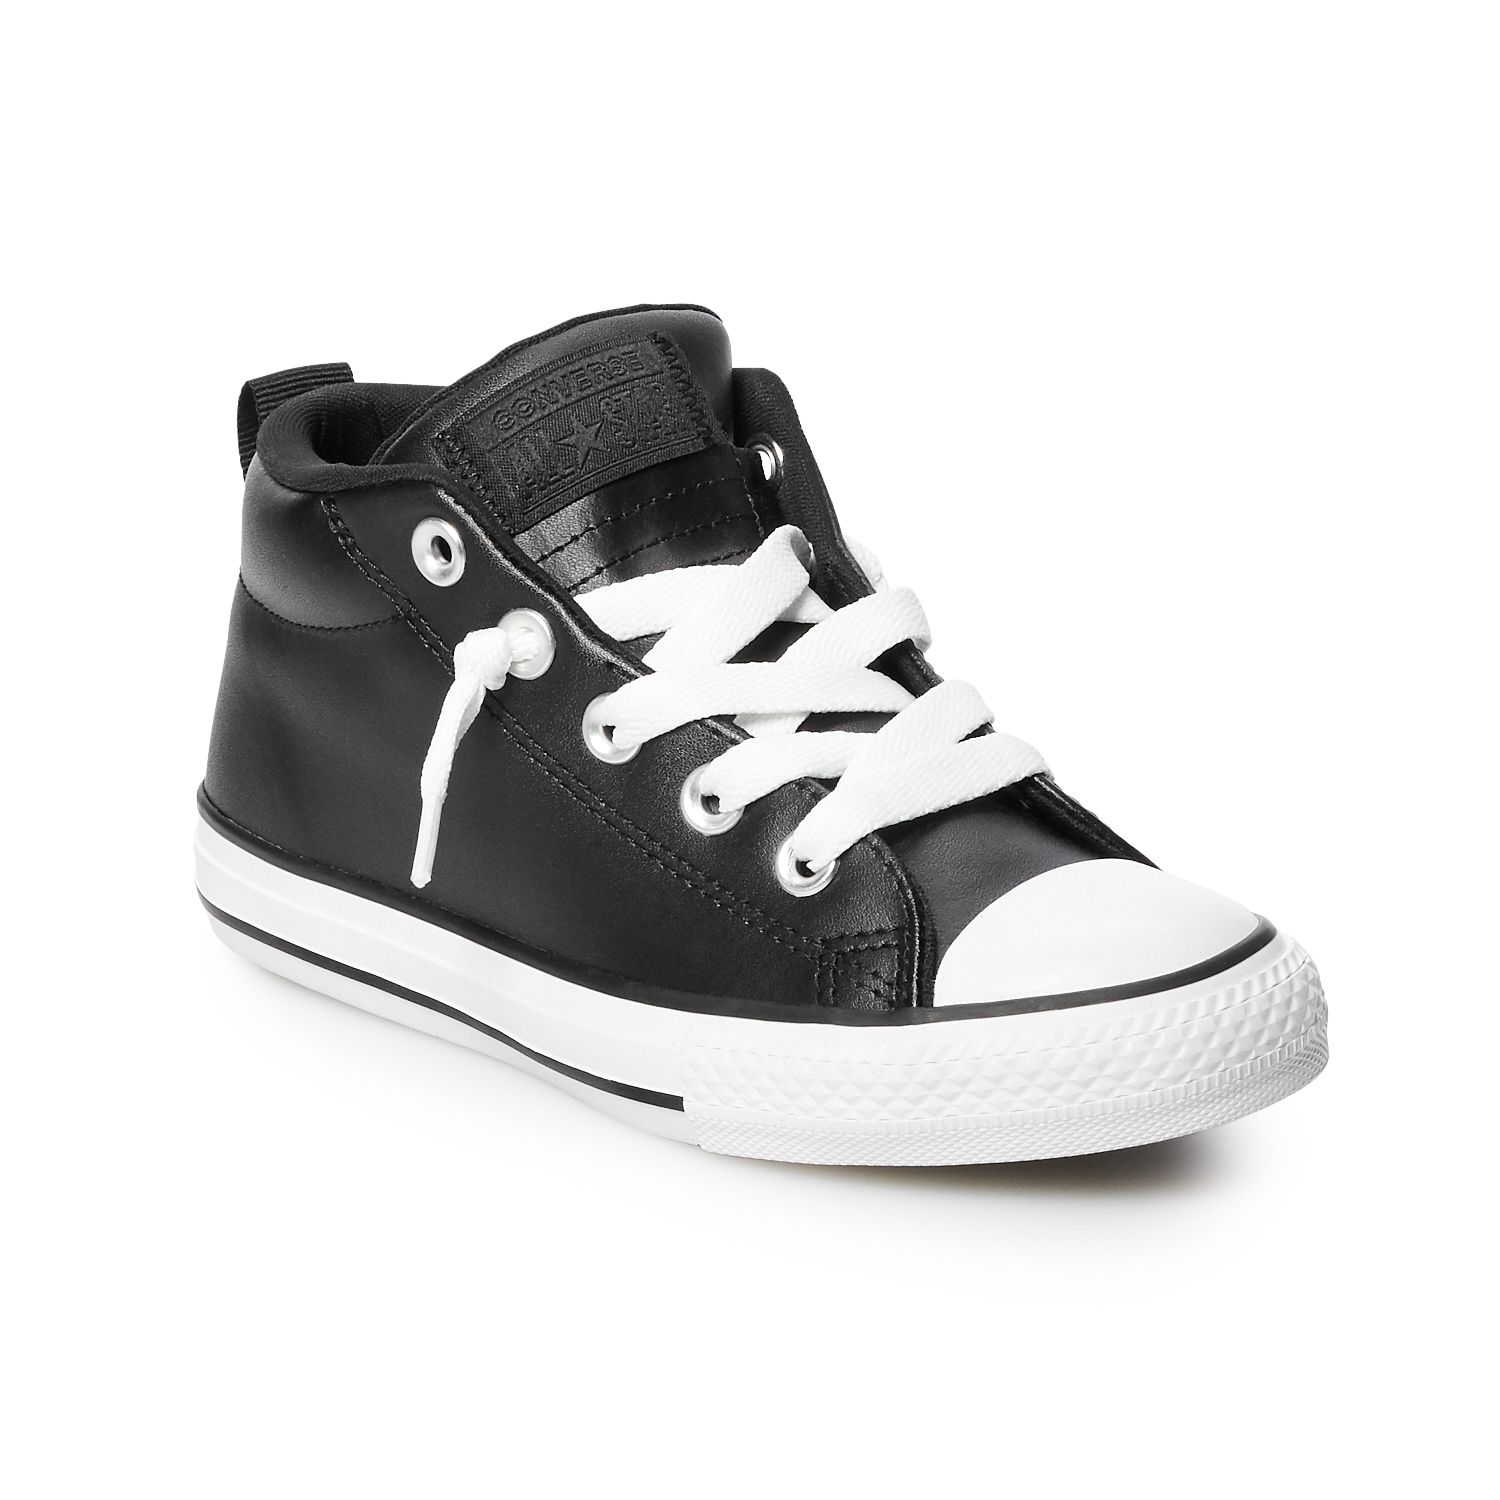 converse leather sneakers